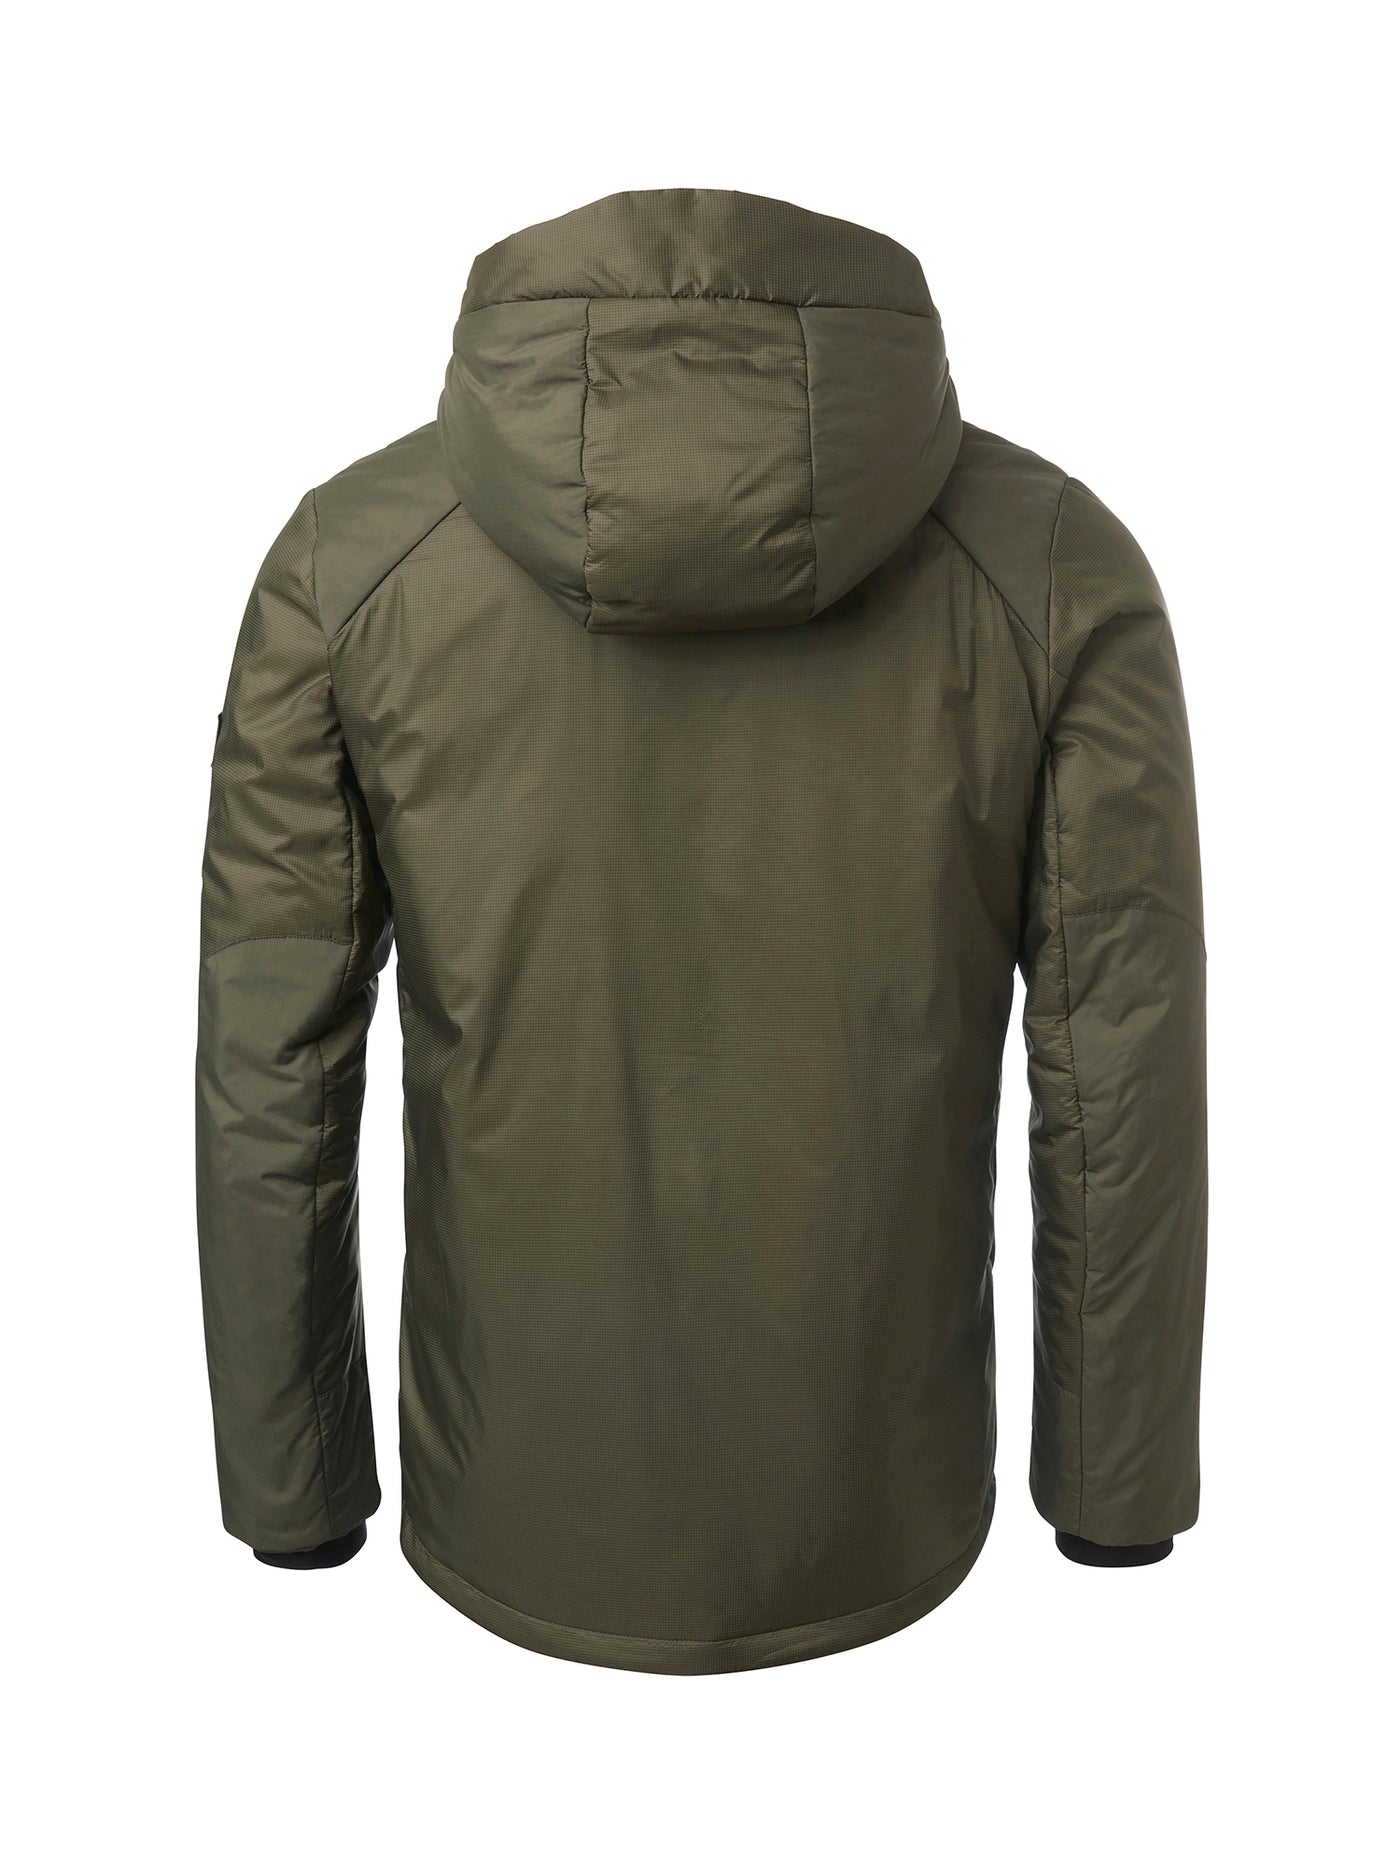 Chevalier THERMO FILL140 HOOD JACKET